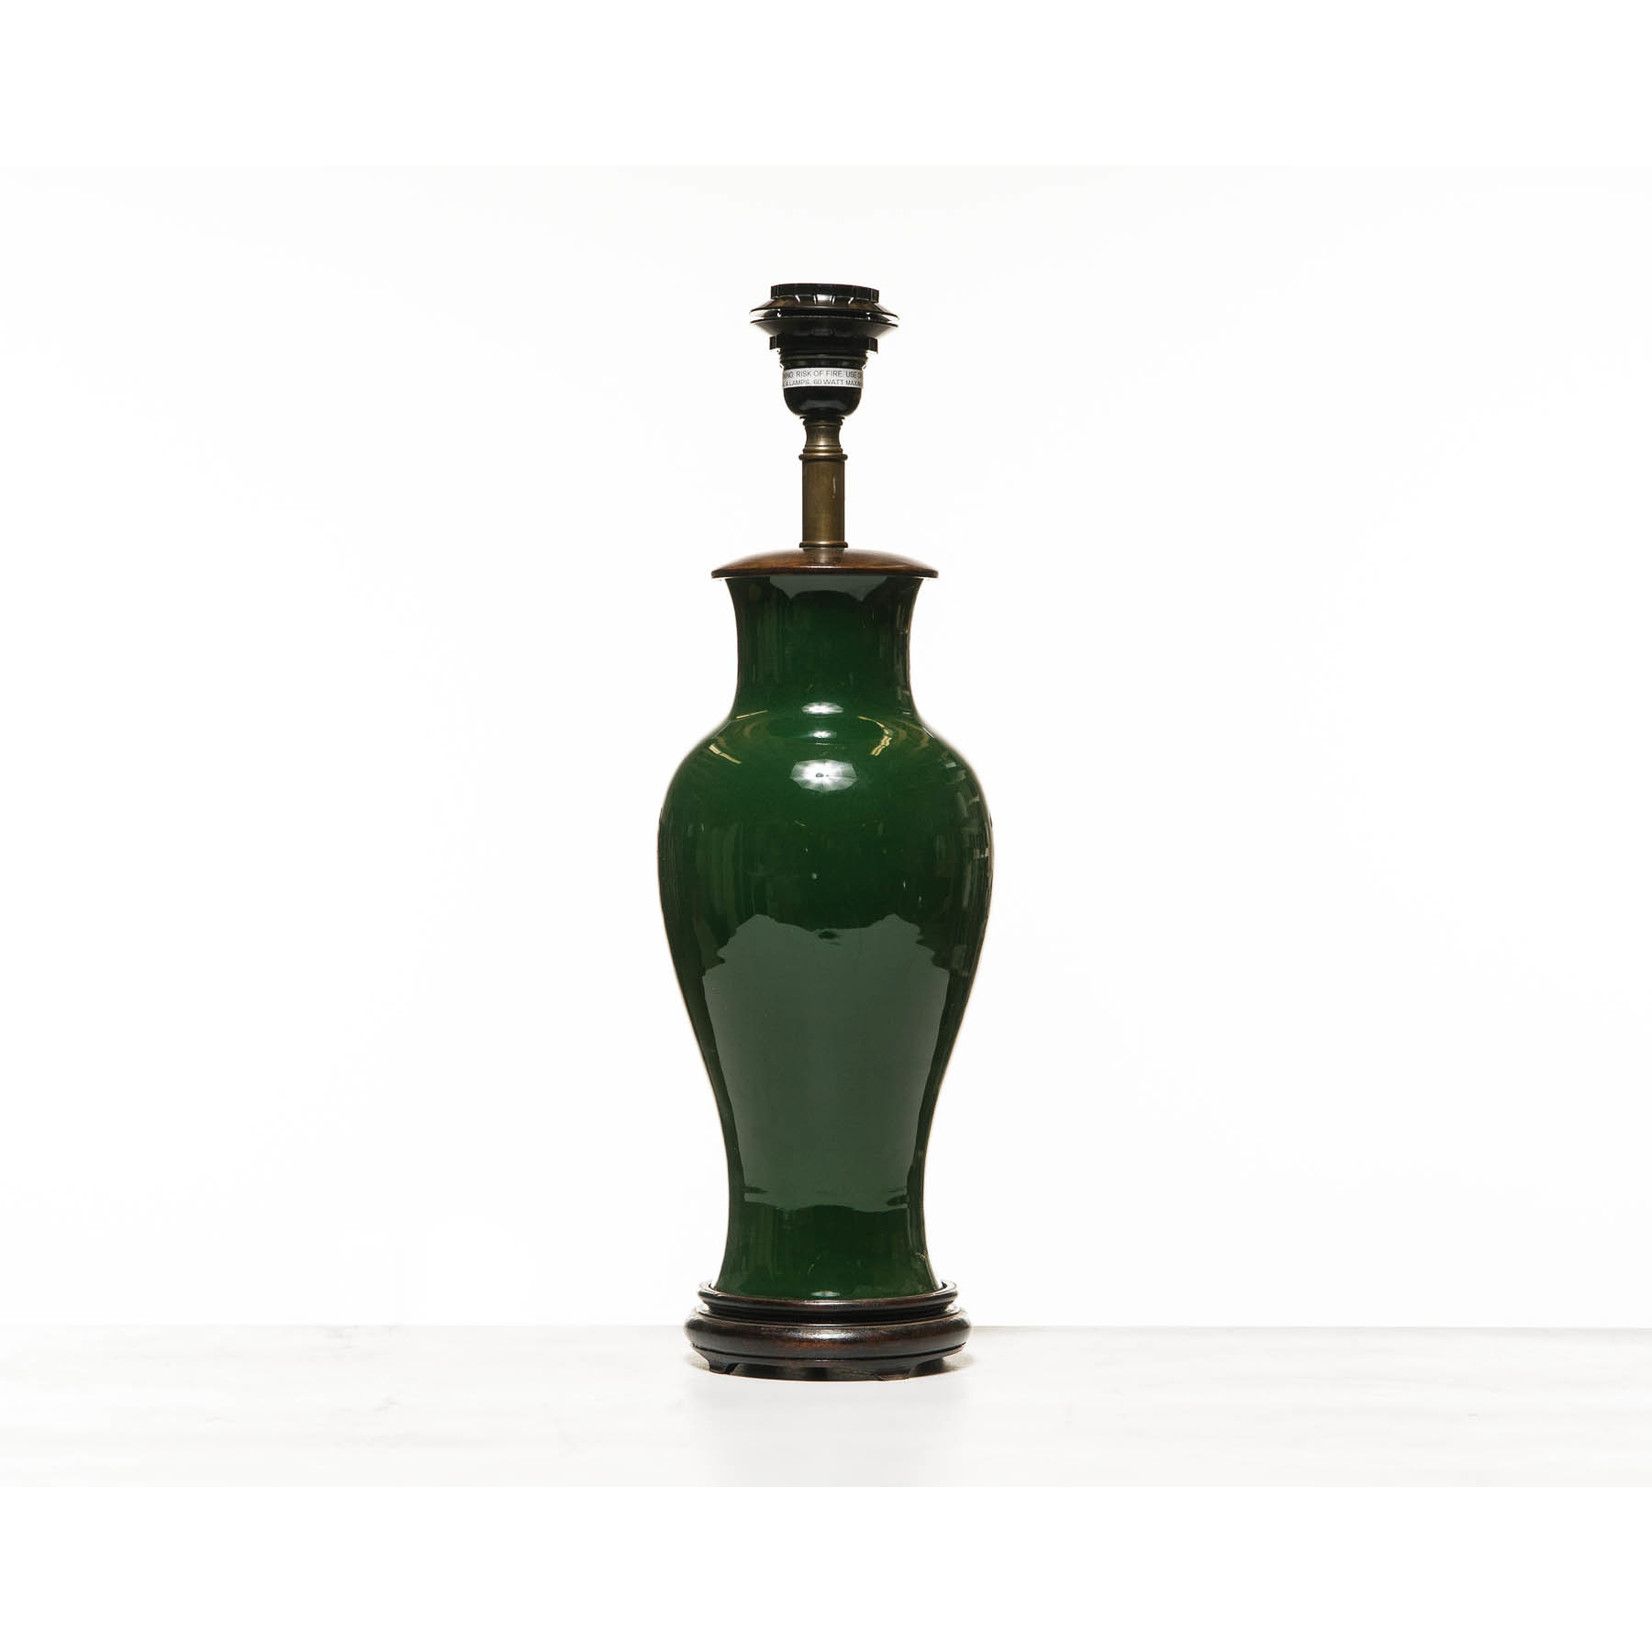 Lawrence & Scott Gabrielle Porcelain Lamp in Racing Green with Rosewood Base